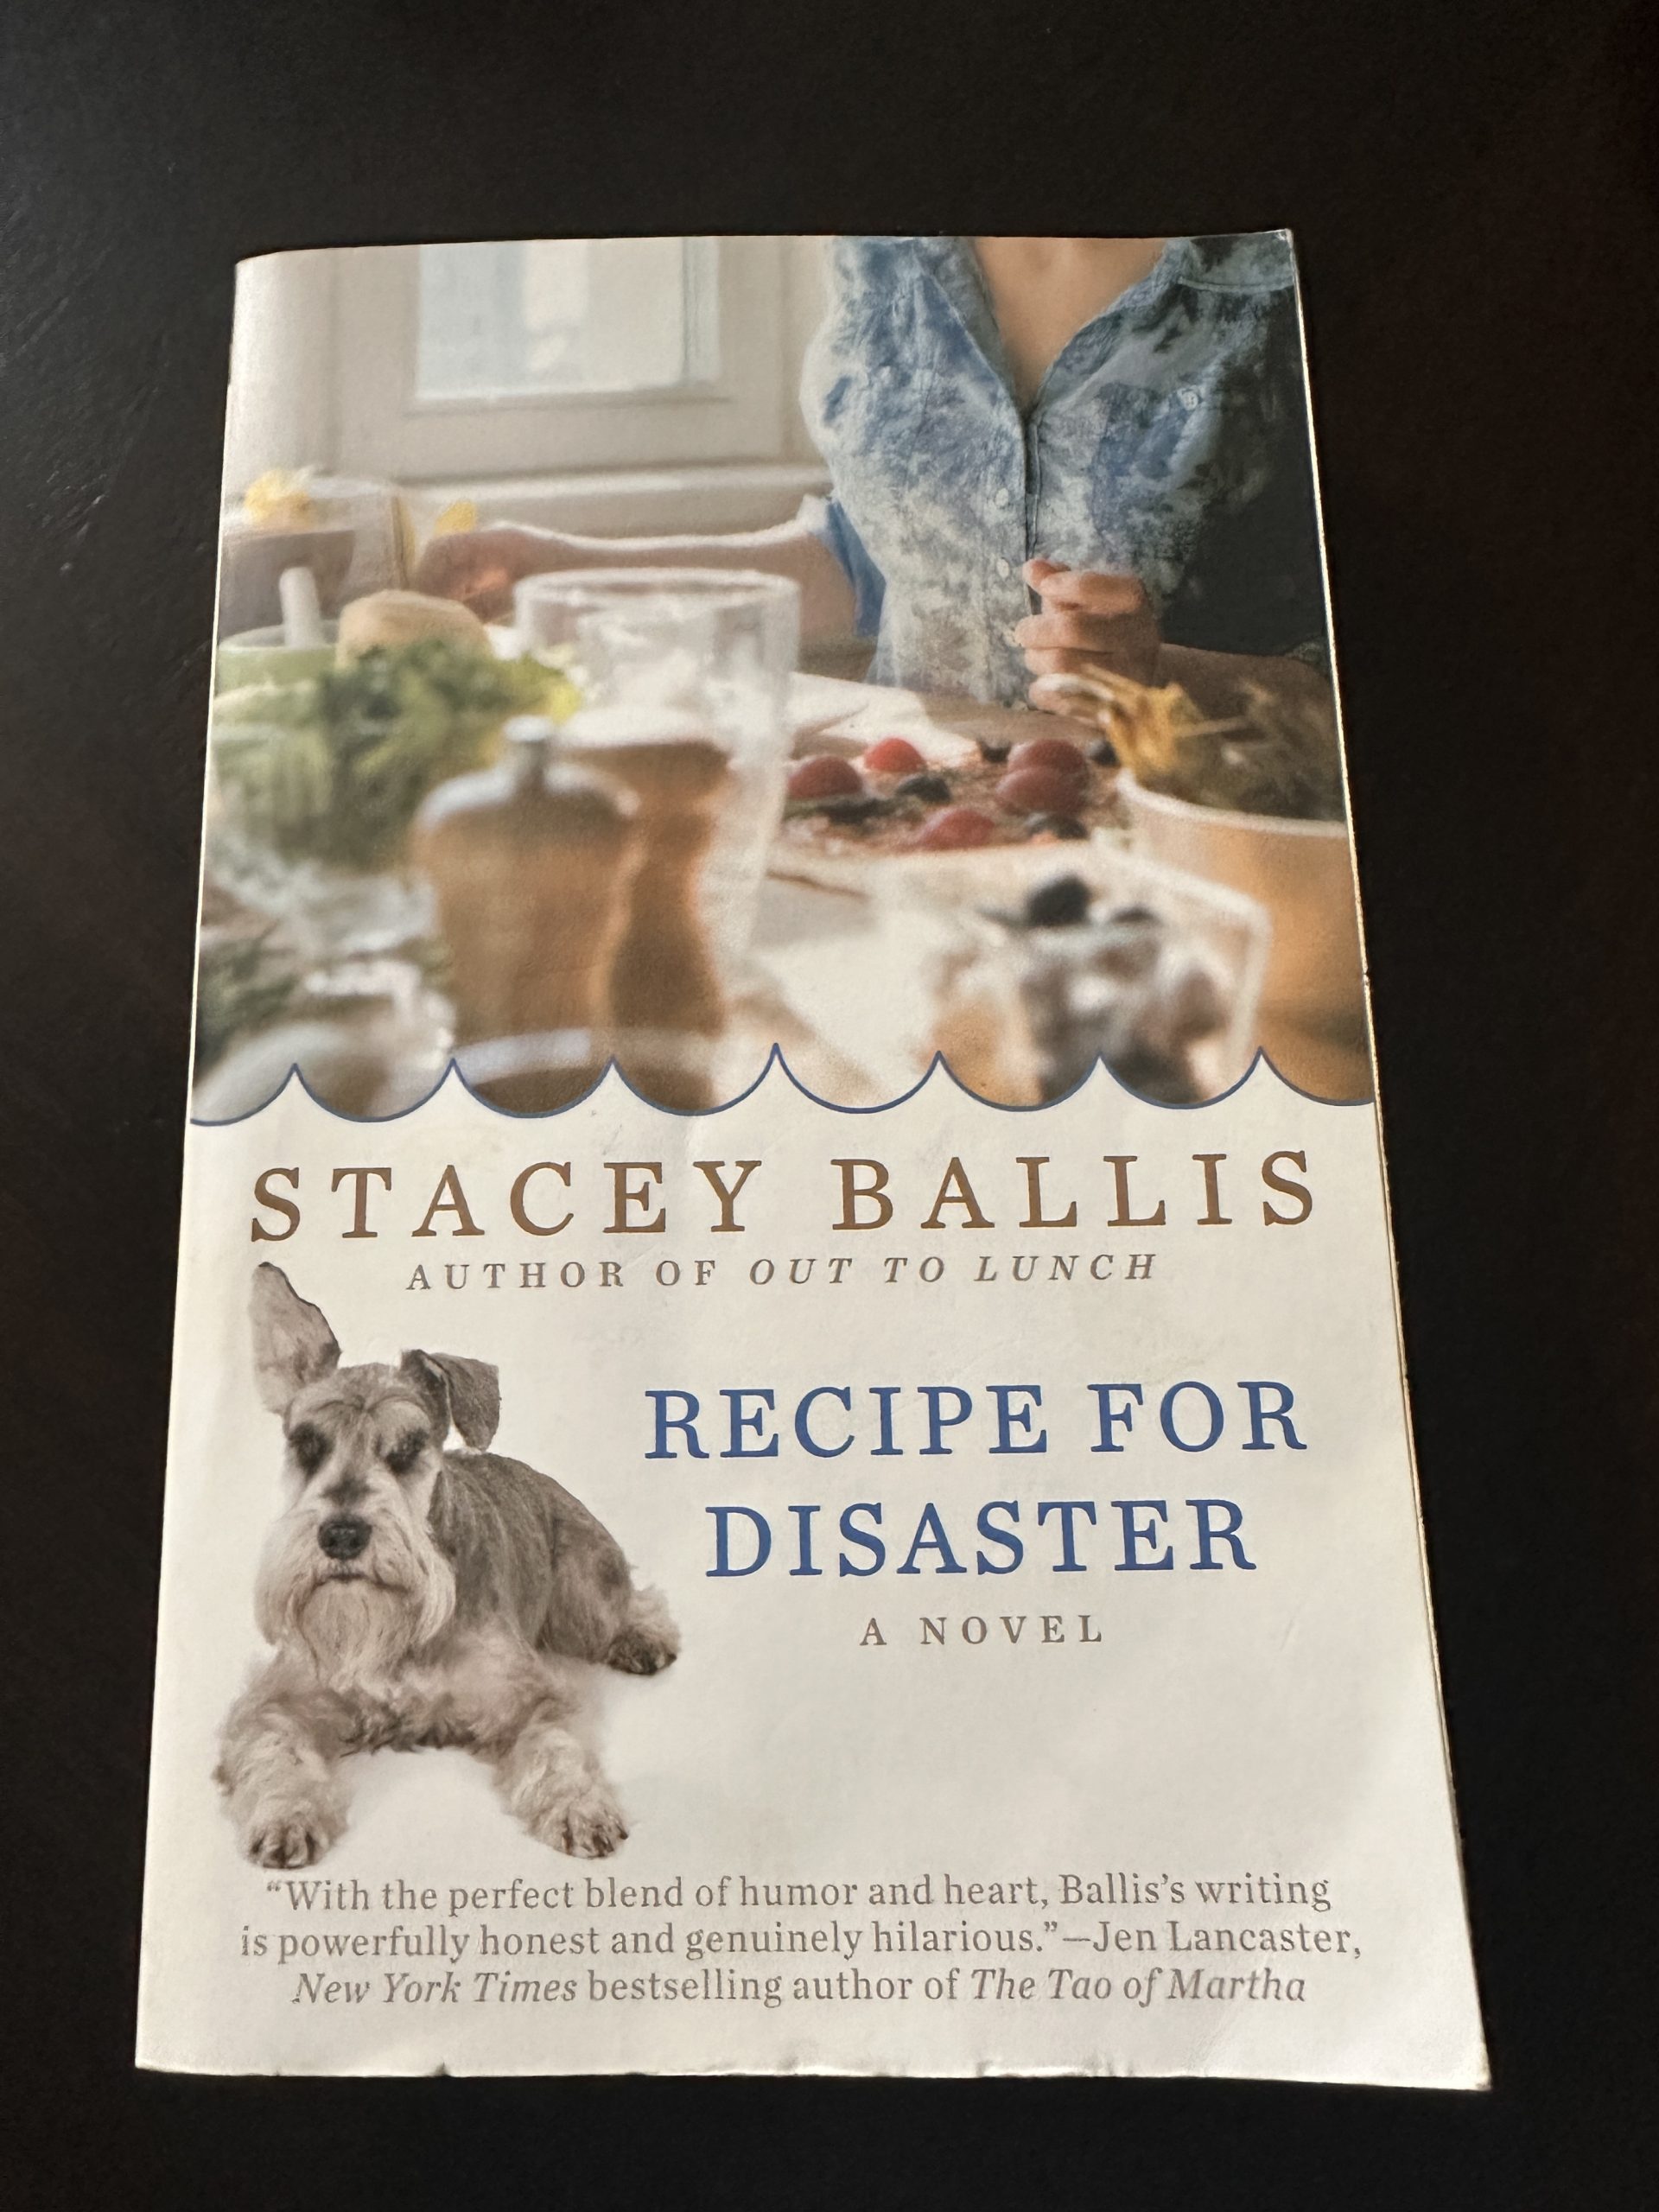 Recipe For Disaster by Stacey Ballis